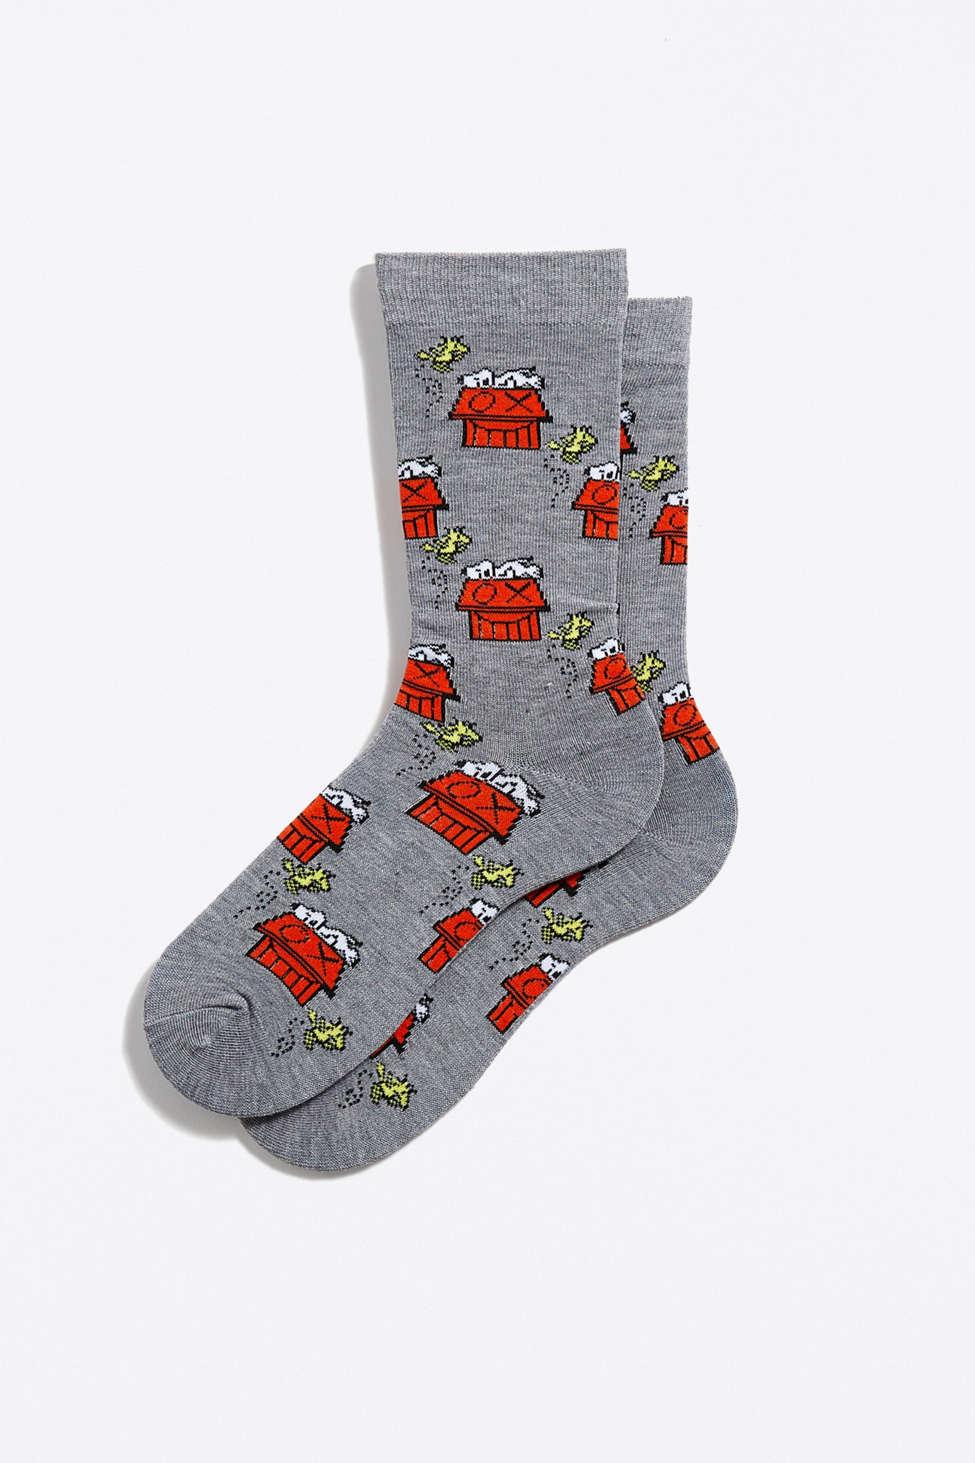 Lyst - Urban Outfitters Peanuts X Mr. A Snoopy Sock in Gray for Men